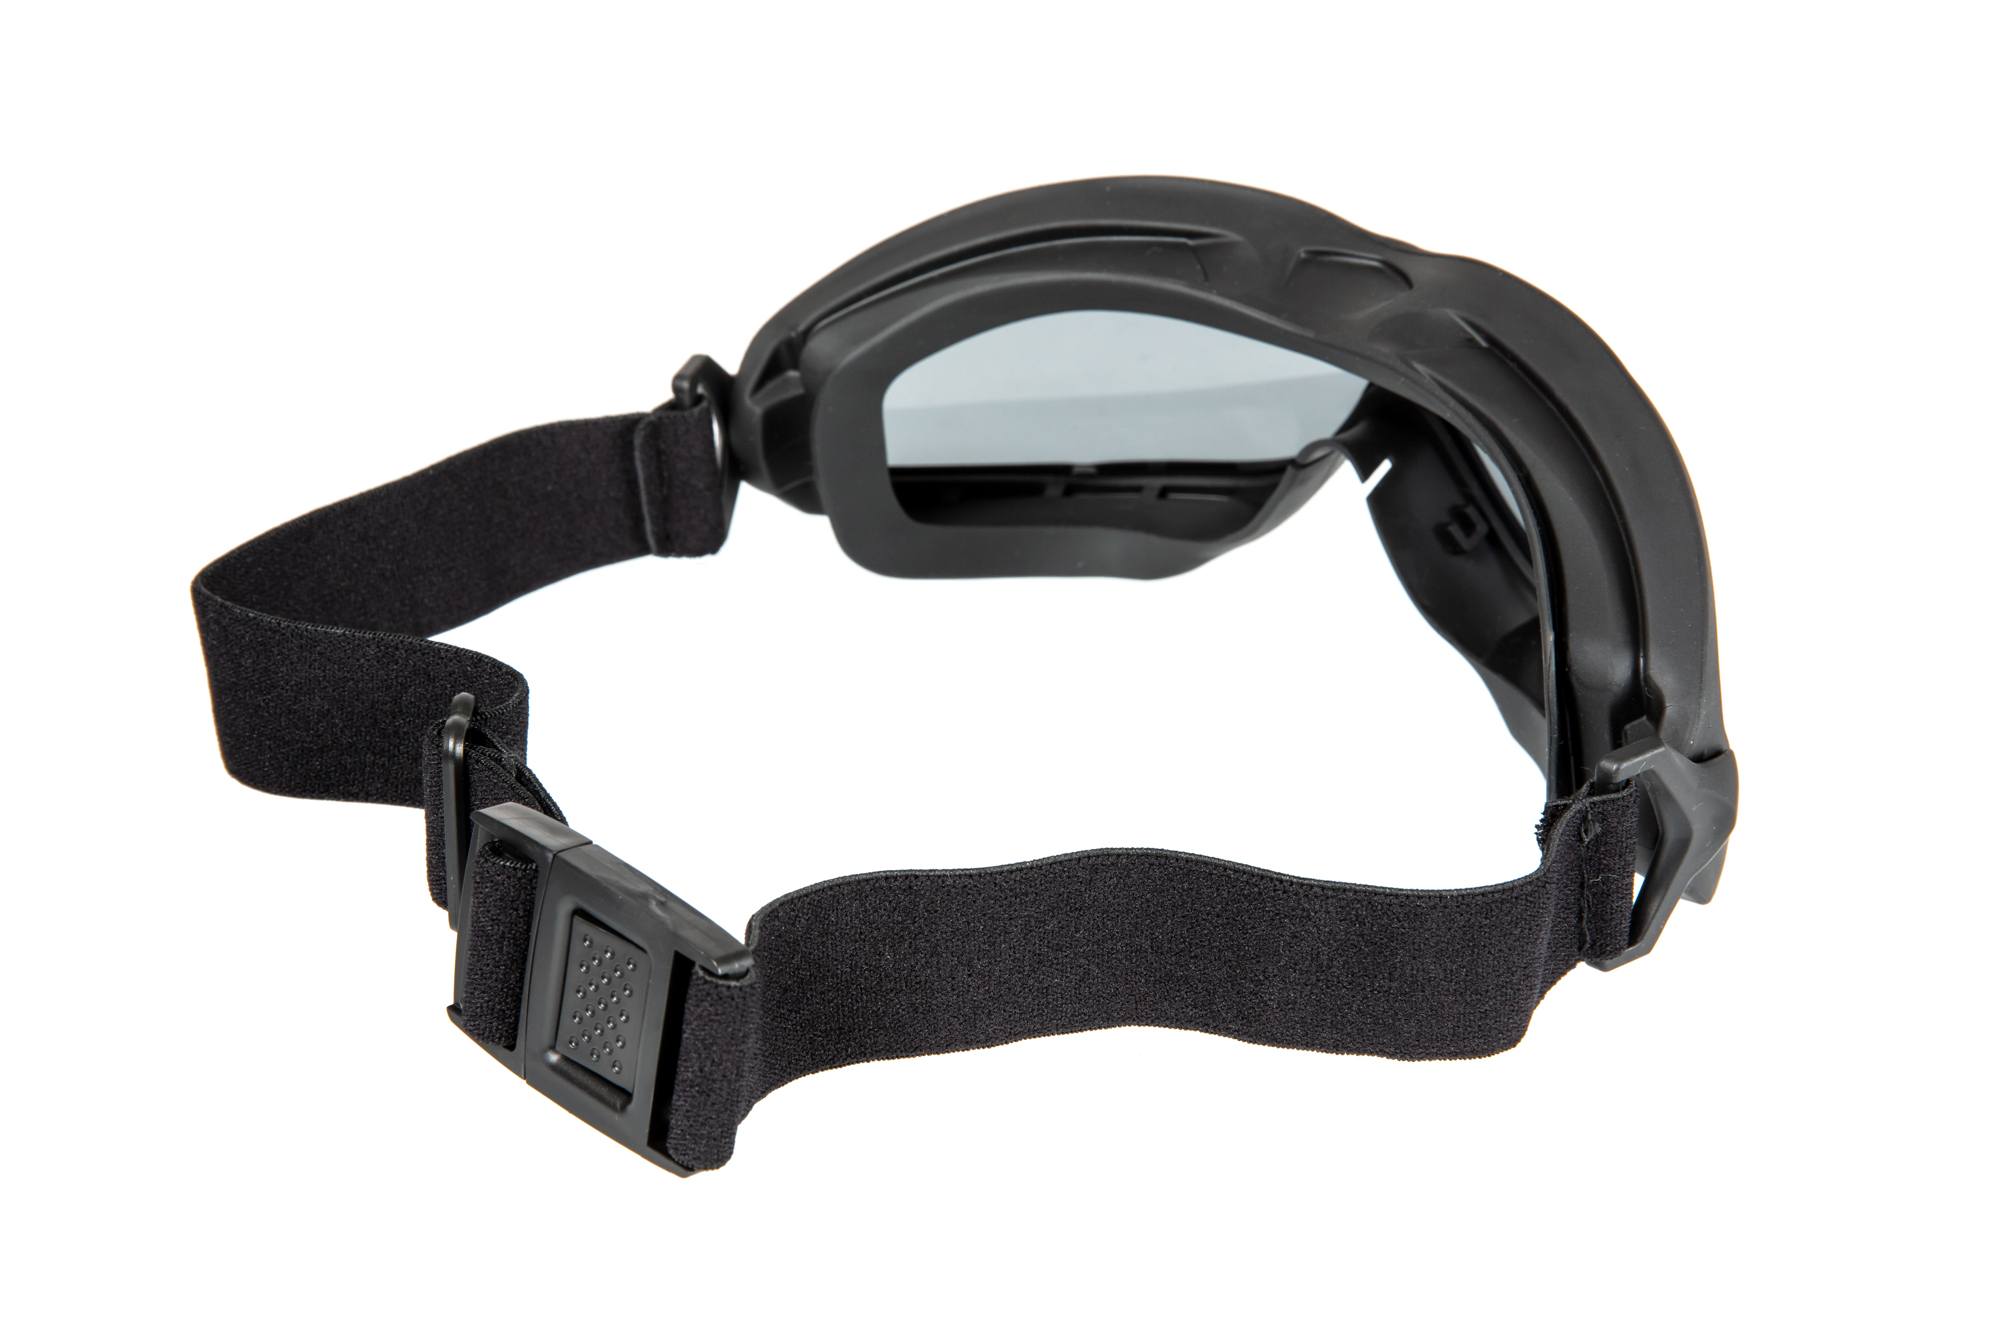 Spectra Double Layer Goggles – Black